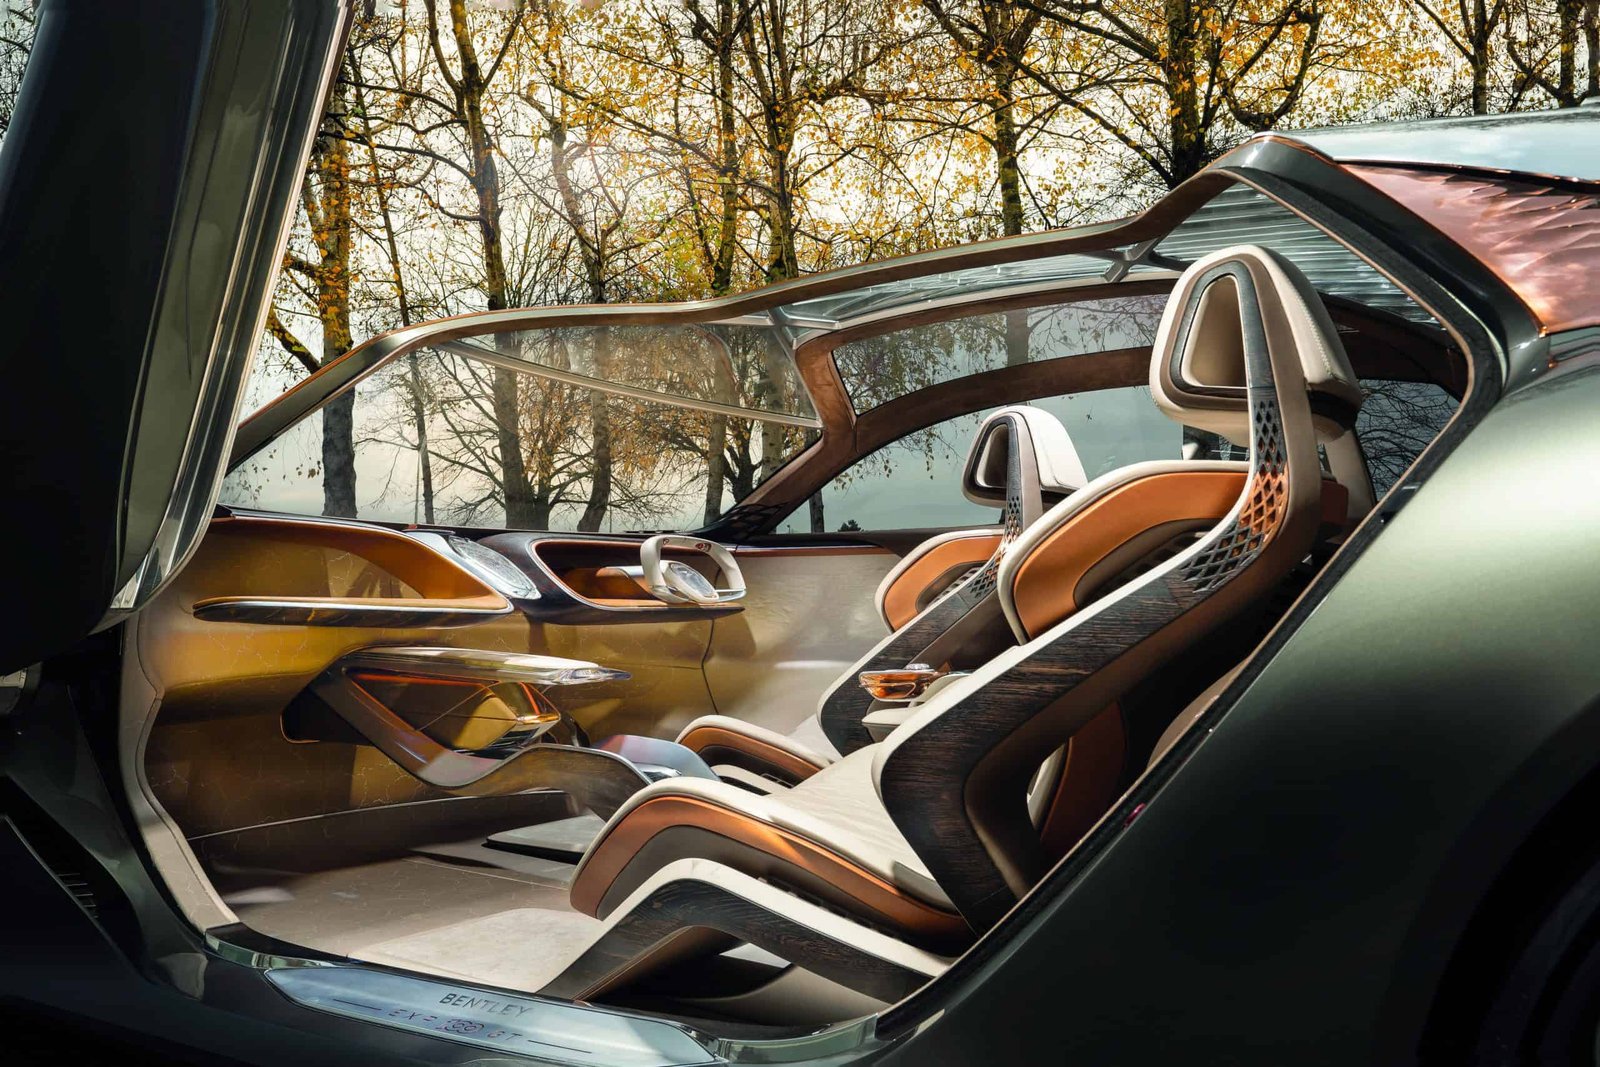 The interior of a futuristic car in the woods, a true experiment in automotive invention.